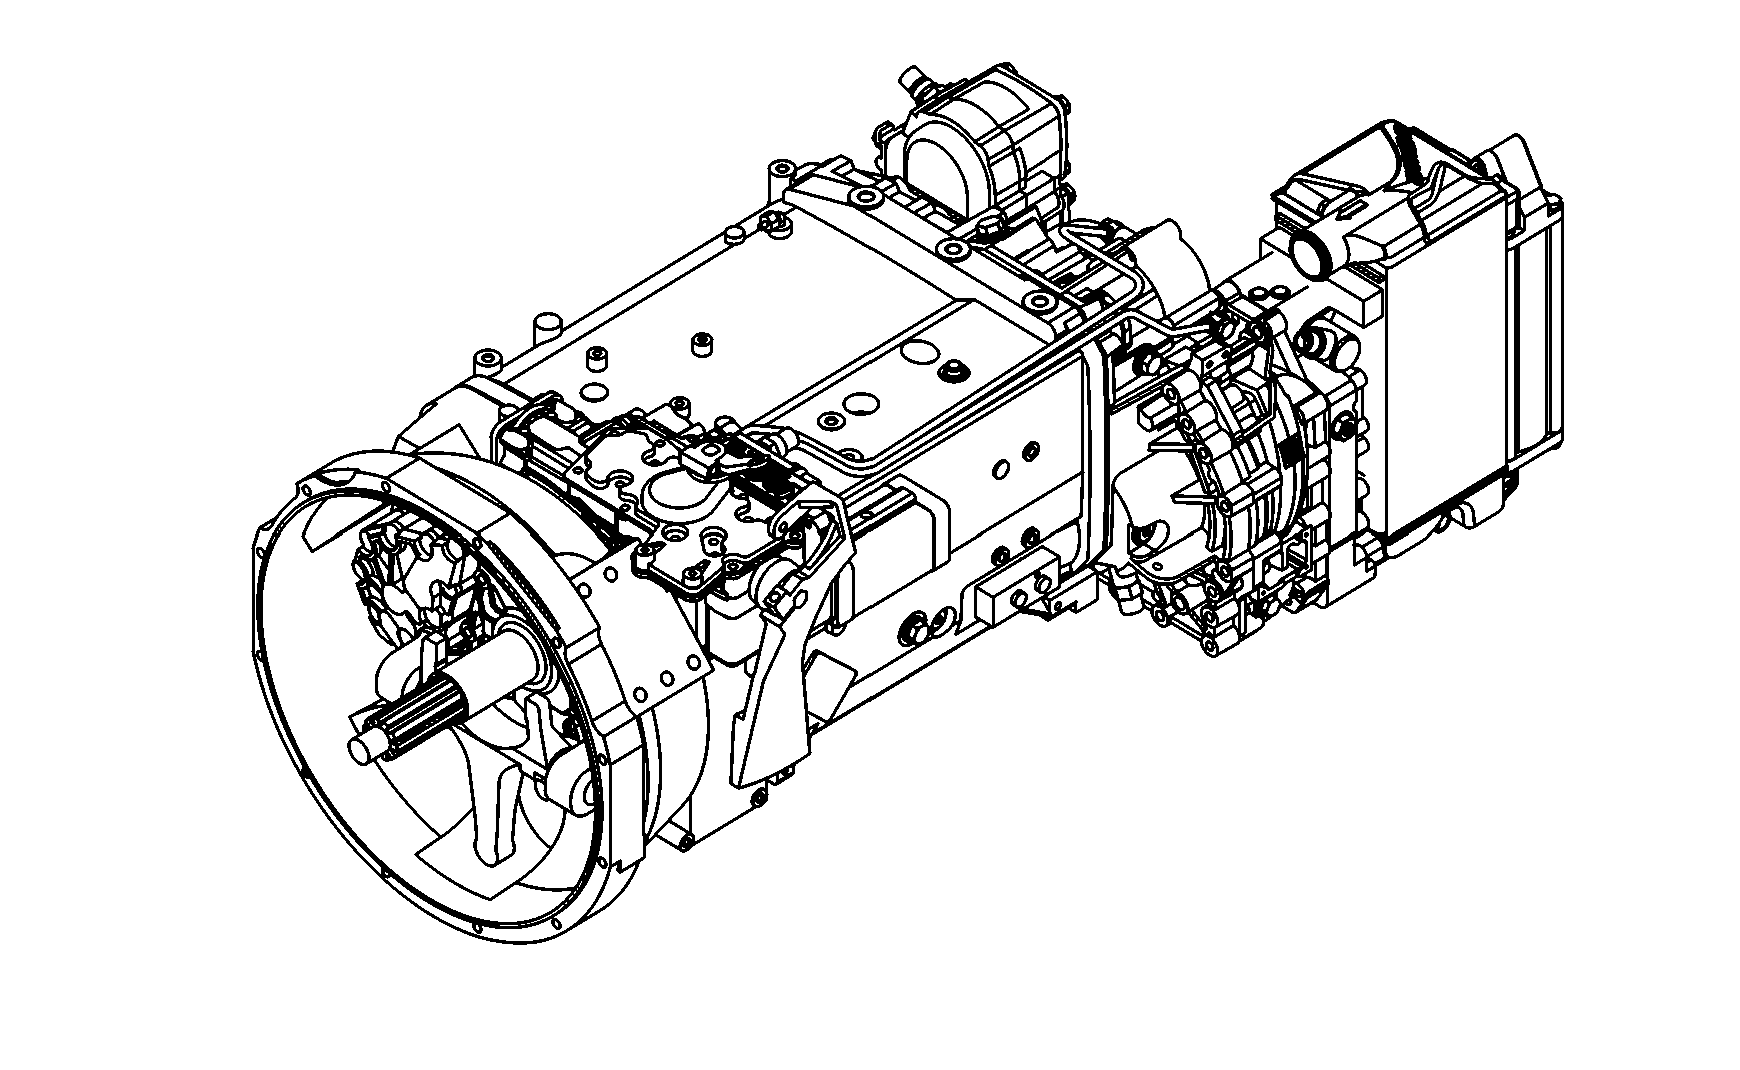 drawing for NISSAN MOTOR CO. 32015-NA03A - 16 S 221 IT (figure 1)